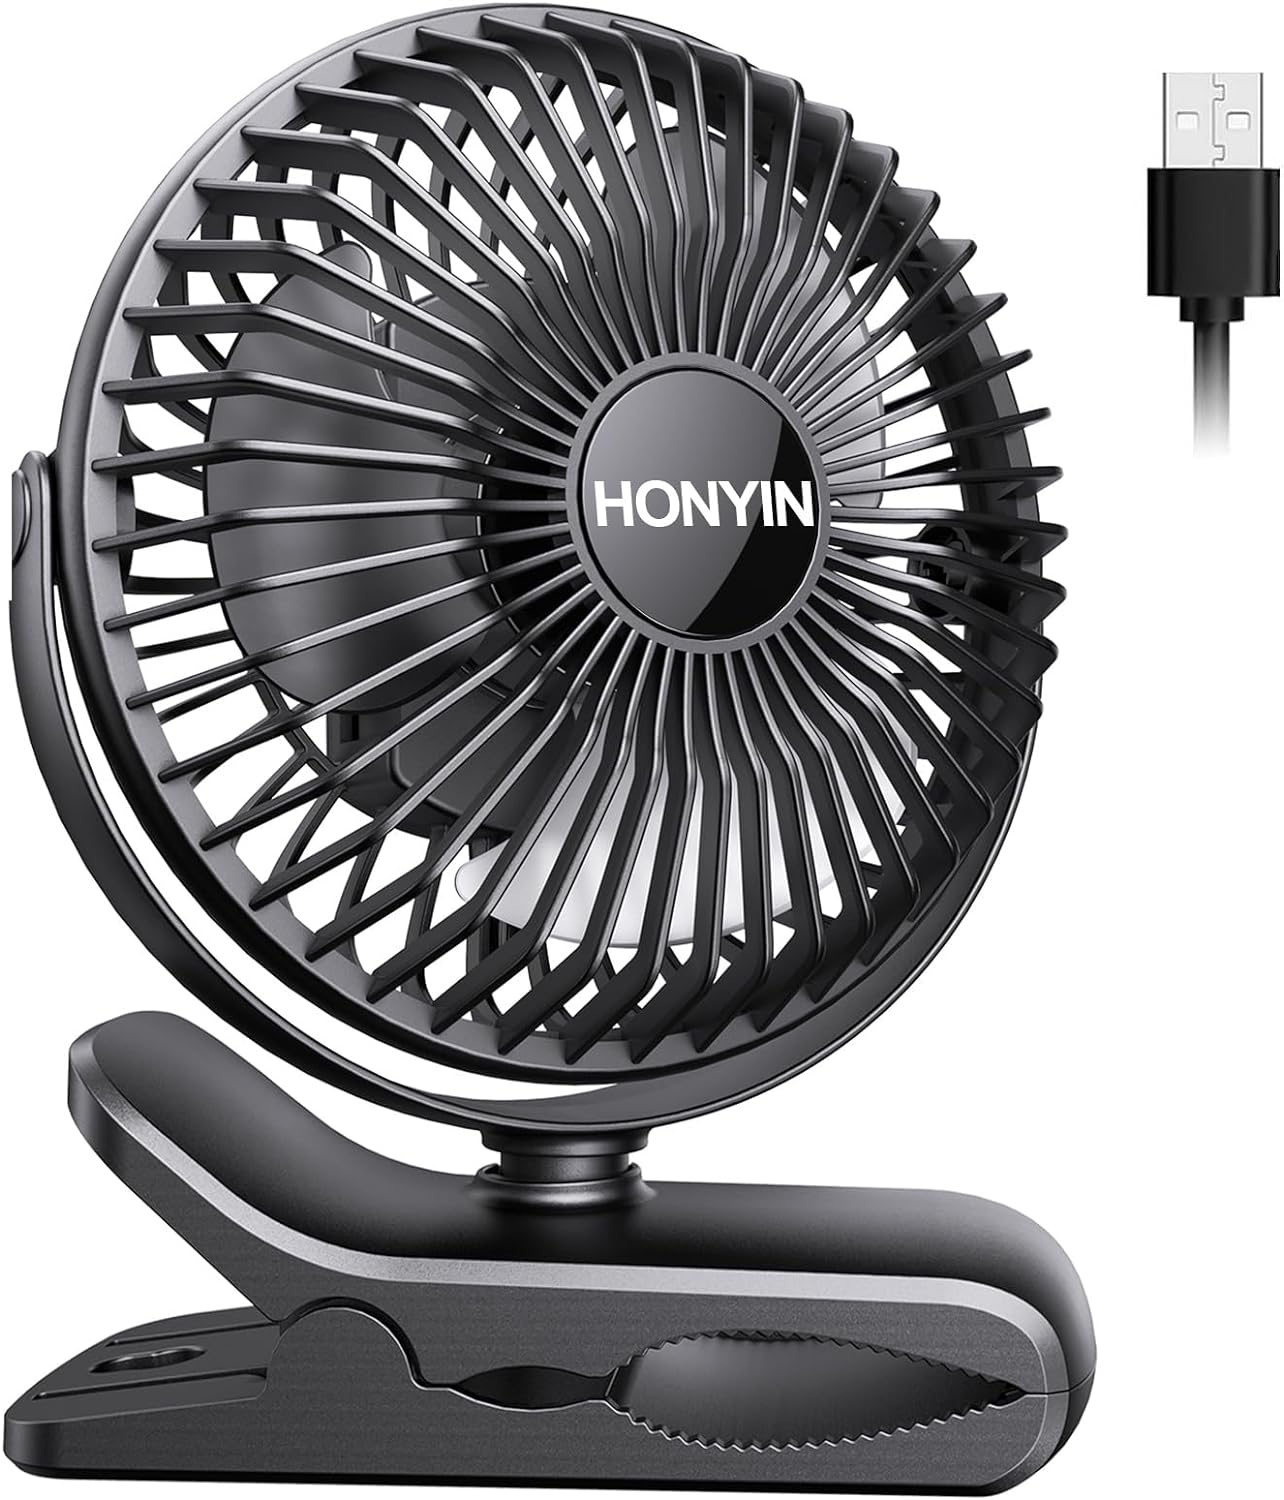 HONYIN 720 Rotation Small Desk & Clip on Fan with Sturdy Clamp, 3 Speeds, Quiet Little Personal Cooling Fan by USB Plug In, for Bedroom Office Desktop Treadmill